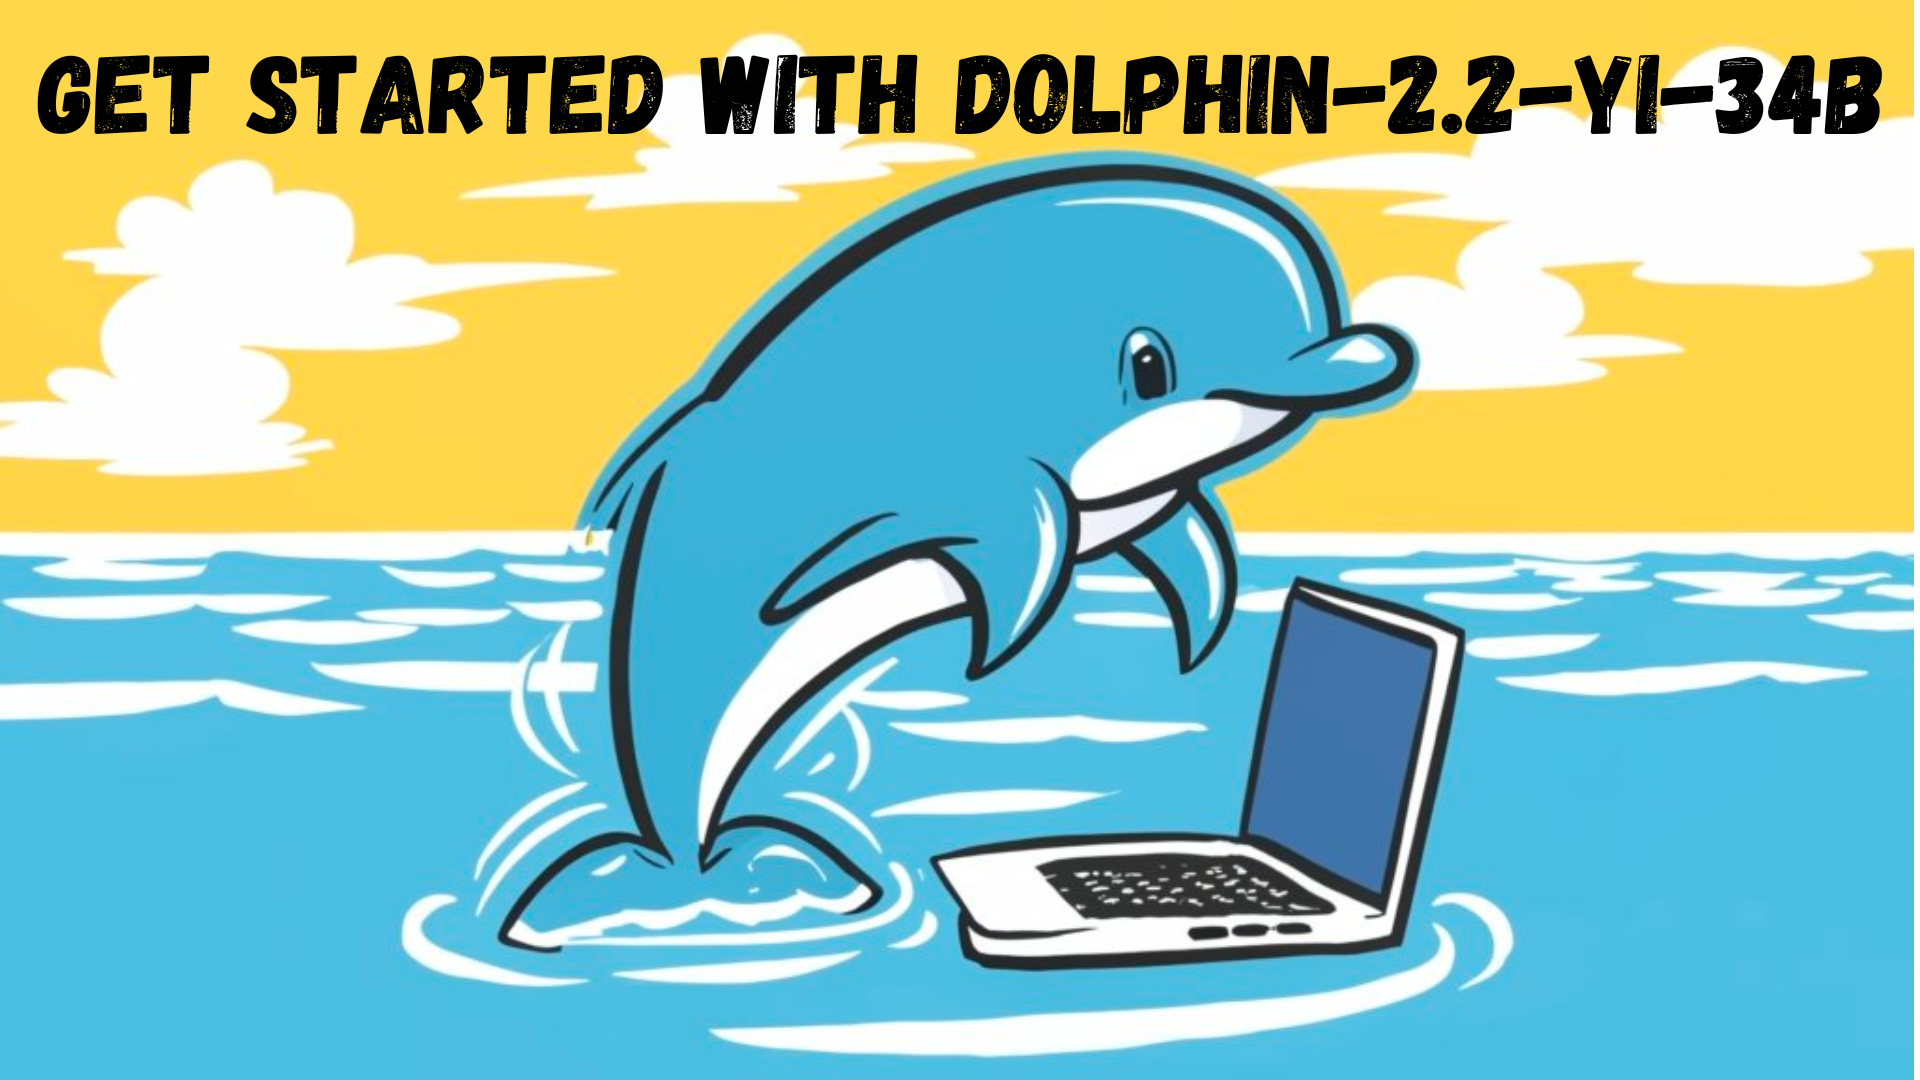 The dolphin-2.2-yi-34b model is based on the 34B LLM, Yi, released by the 01.AI team. Yi is converted to the llama2 format by Charles Goddard and then